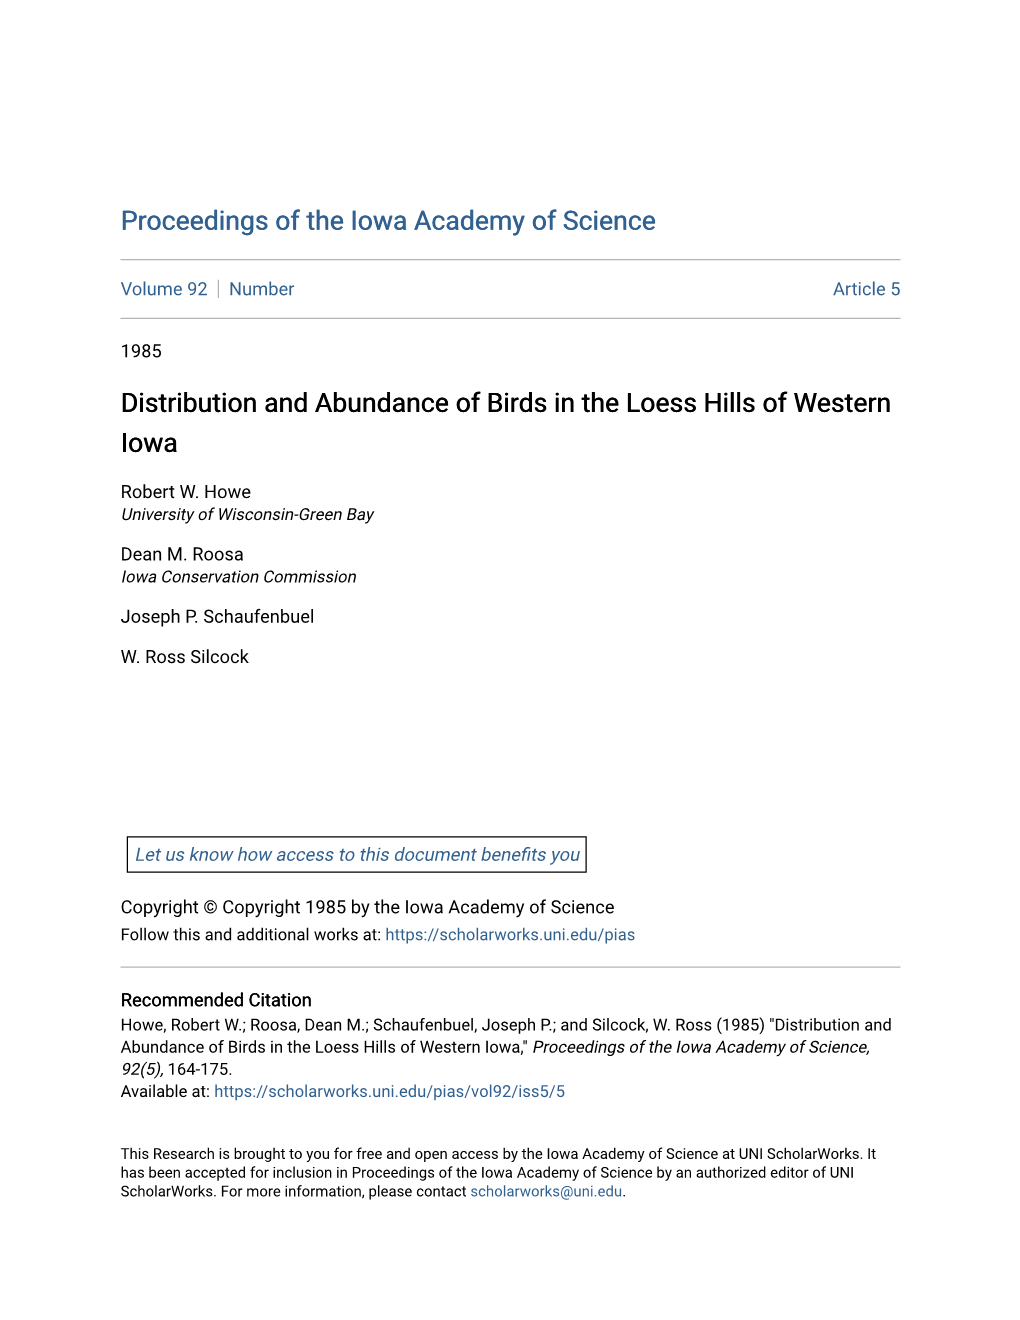 Distribution and Abundance of Birds in the Loess Hills of Western Iowa